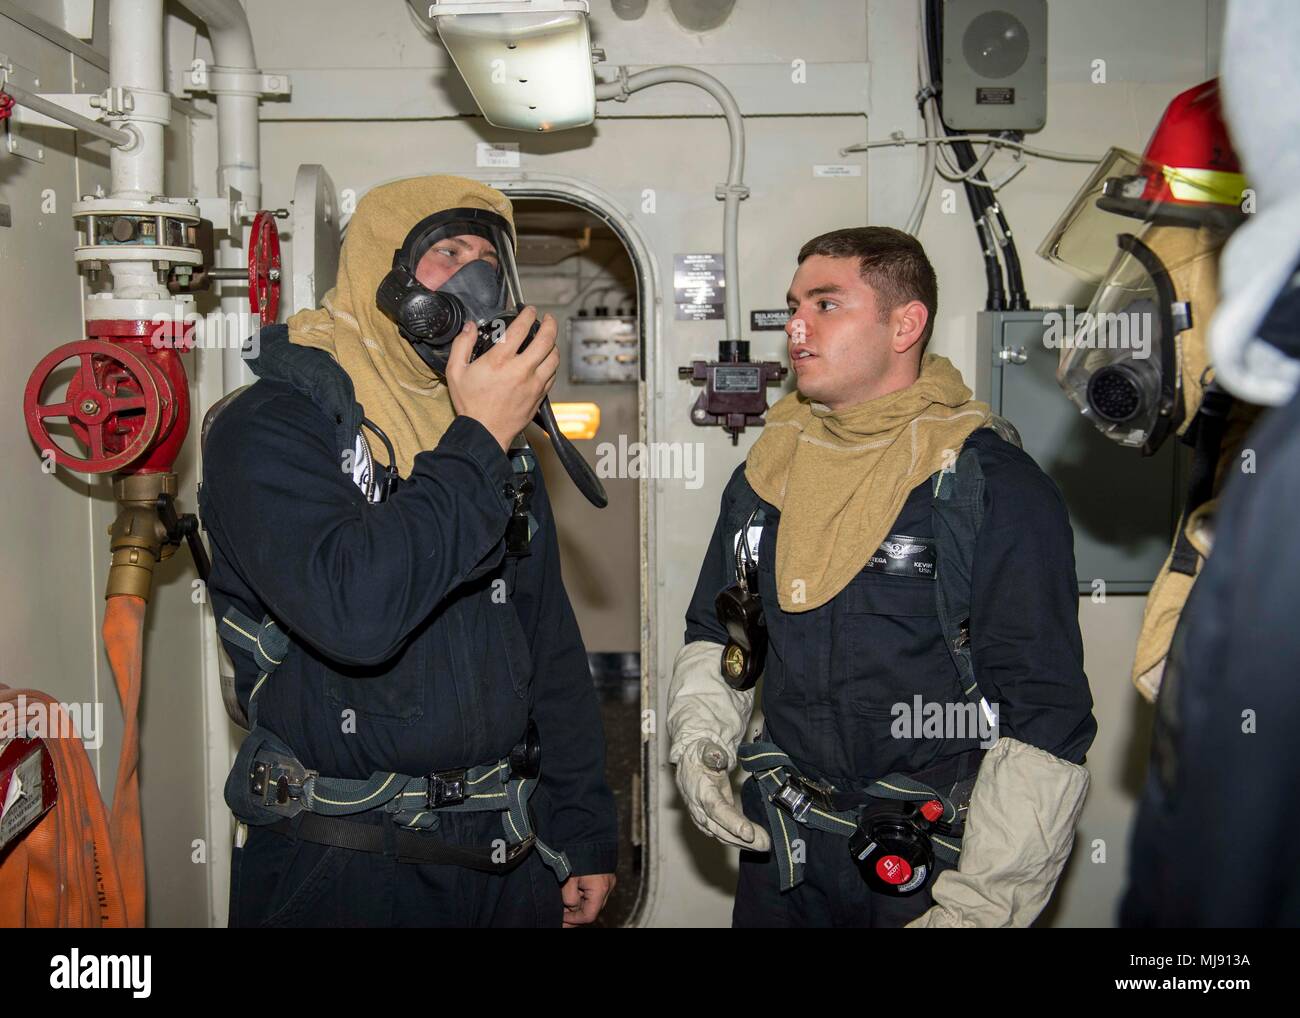 U.S. 5TH FLEET AREA OF OPERATIONS (April 20, 2018) Logistics Specialist 2nd Class Kevin Ortega, right, gives Machinist’s Mate 3rd Class Joseph Mele self-contained breathing apparatus training during a general quarters drill aboard the Wasp-class amphibious assault ship USS Iwo Jima (LHD 7) April 20, 2018. Iwo Jima, homeported in Mayport, Fla., is on a regularly scheduled deployment to the U.S. 5th Fleet area of operations in support of maritime security operations to reassure allies and partners, and preserve the freedom of navigation and the free flow of commerce in the region. (U.S. Navy pho Stock Photo